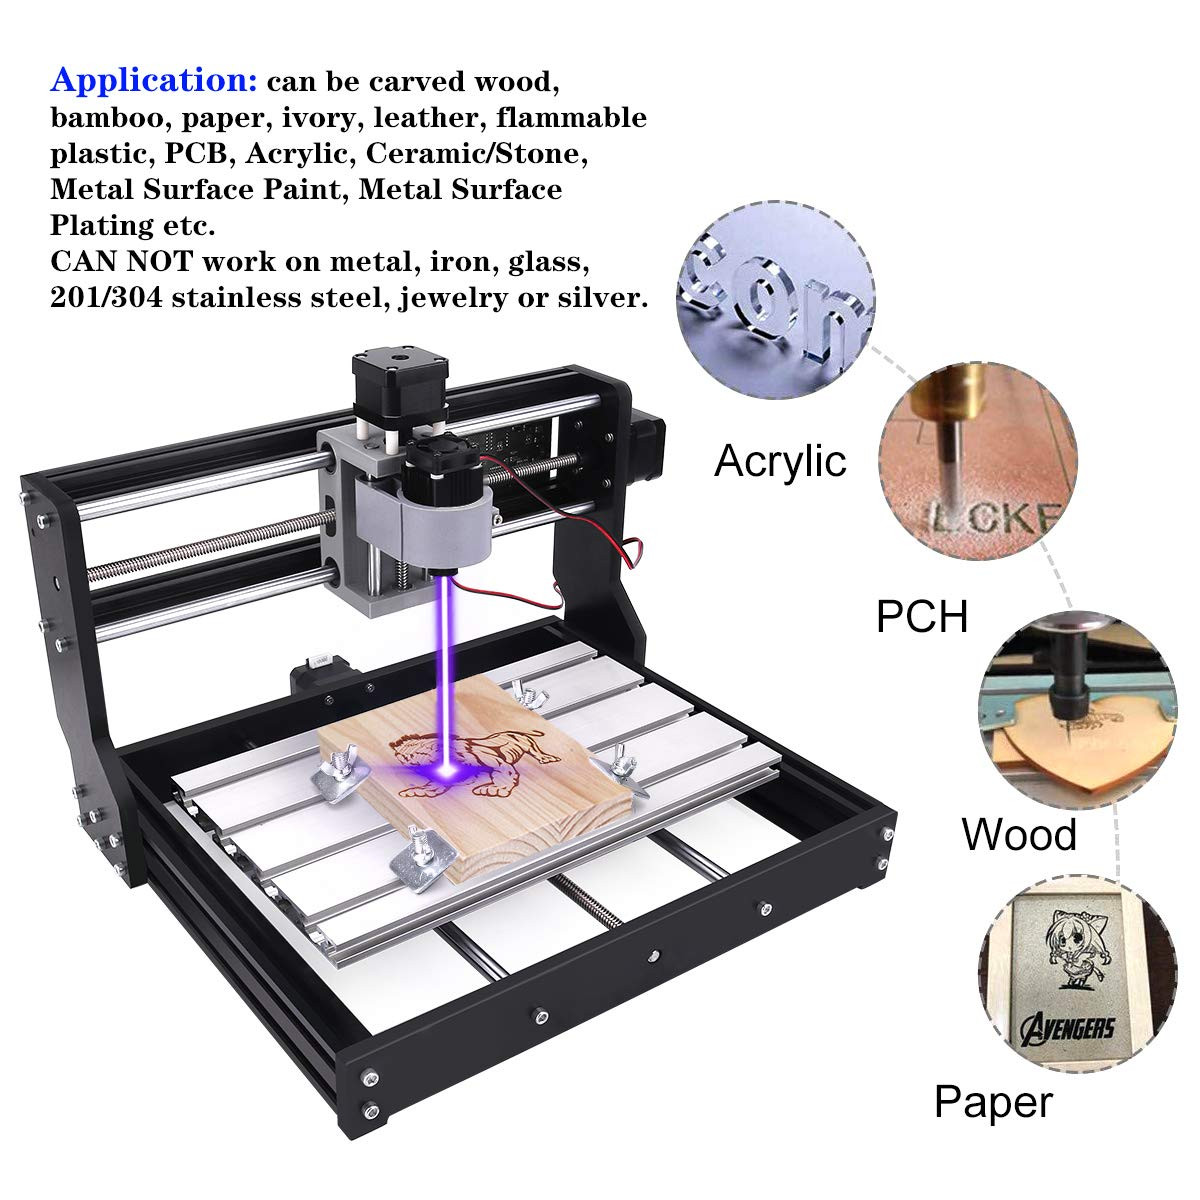 DIY Cnc 3 Axis Engraver Machine Pcb Milling Wood Carving Router Kit Arduino Grbl
 MYSWEETY DIY CNC 3018 PRO 3 Axis CNC Router Kit with